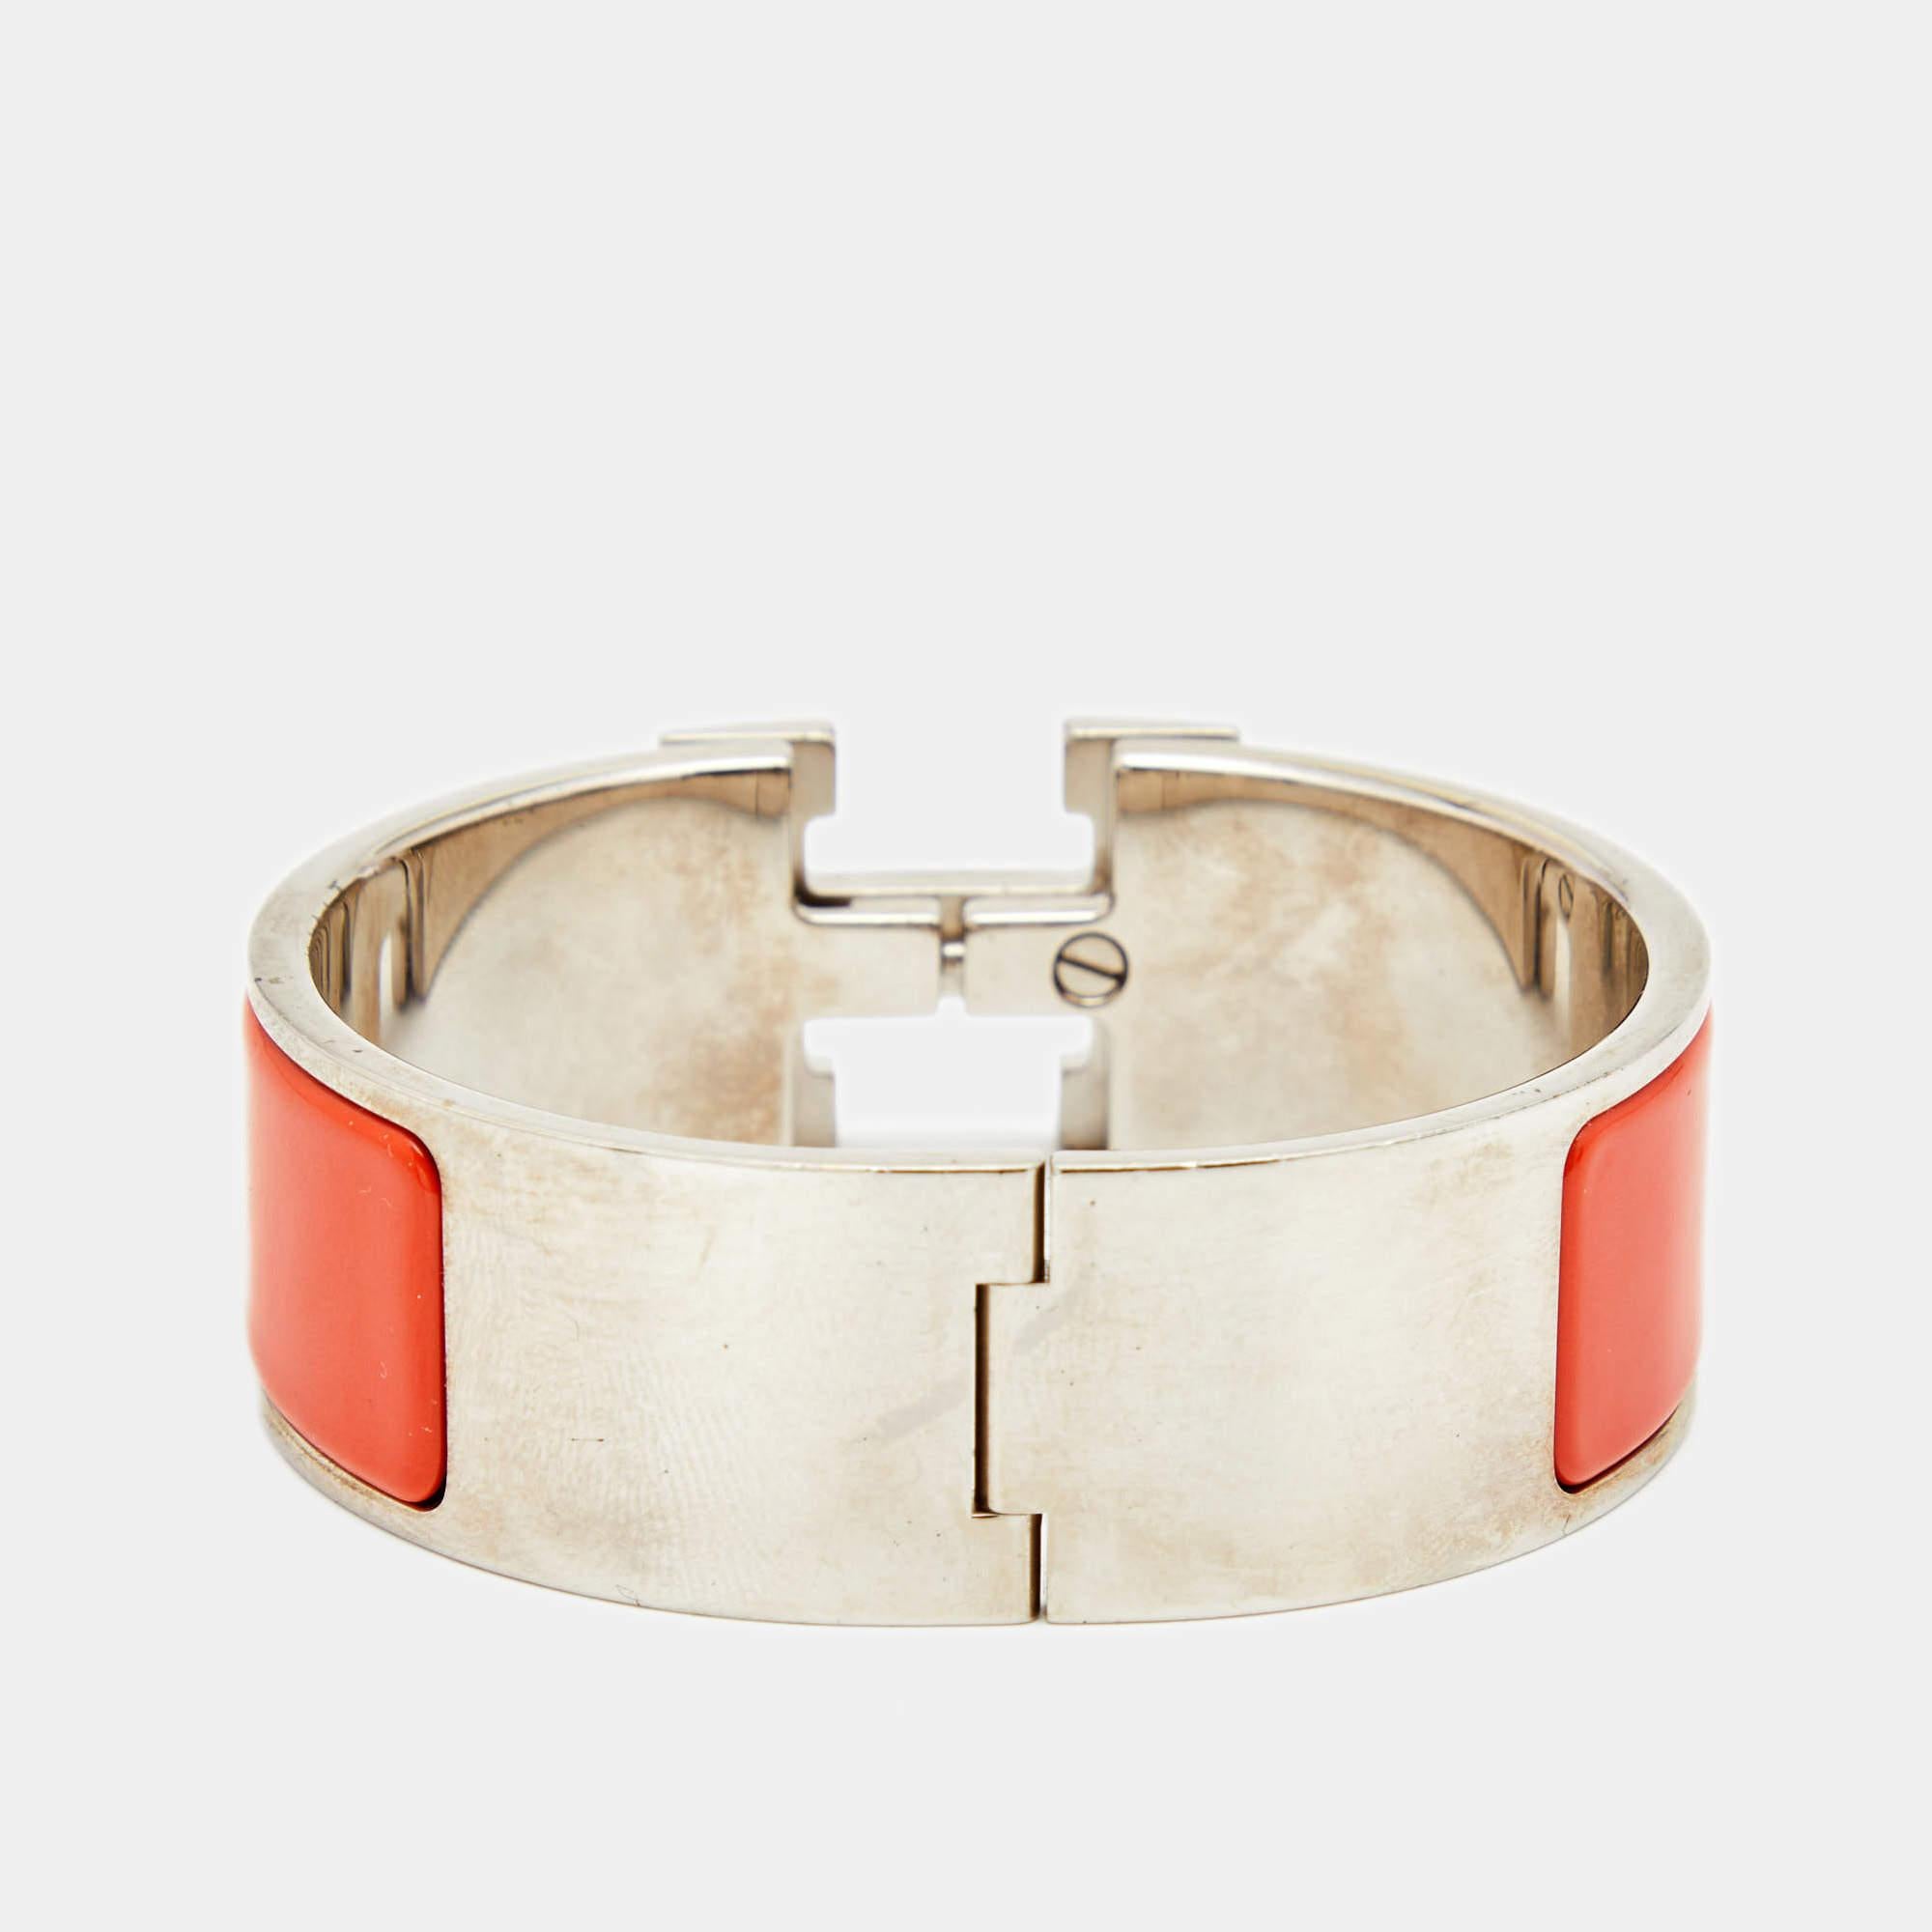 Adorn your wrist with this stunner of a bracelet from Hermès. The piece is from their Clic Clac H collection, and it has been crafted from palladium-plated metal and designed with enamel. This bracelet is complete with the iconic H. Get those